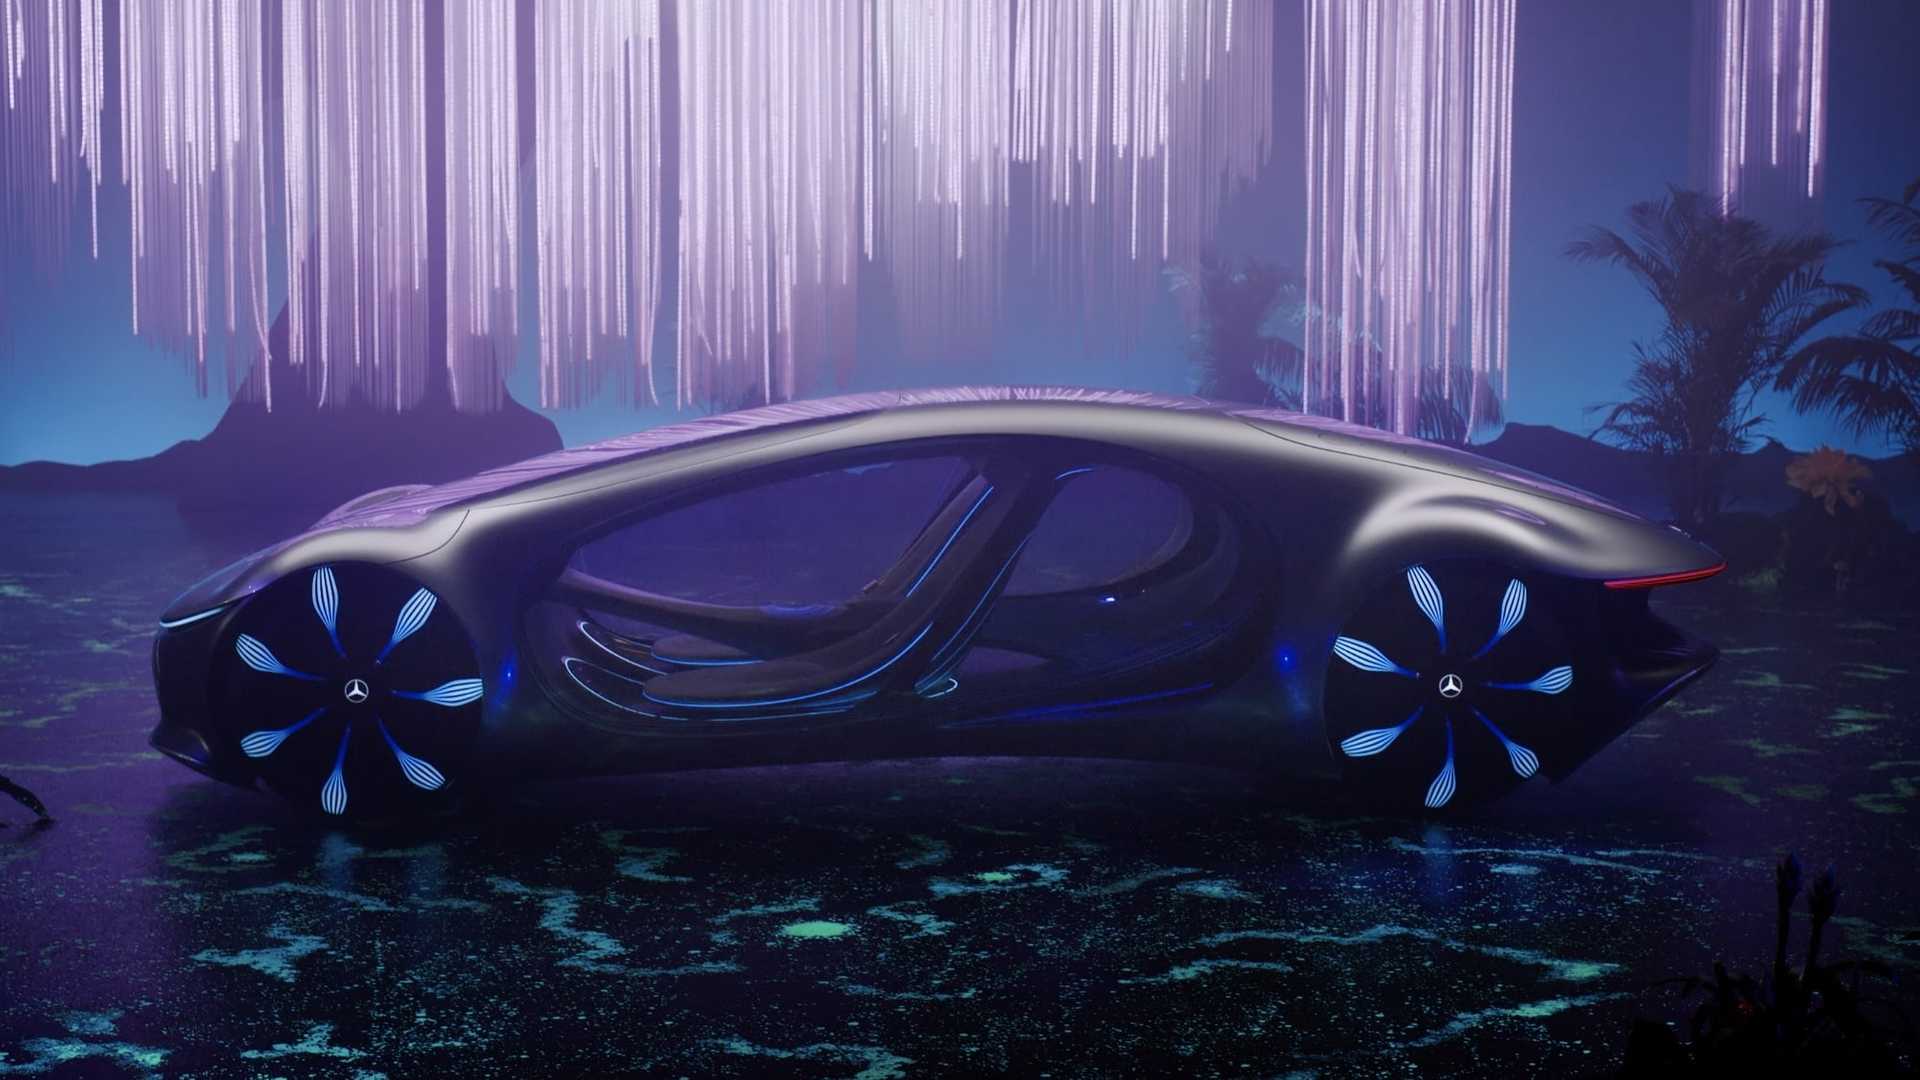 Mercedes built a concept car for Avatar and we drove it  Ars Technica